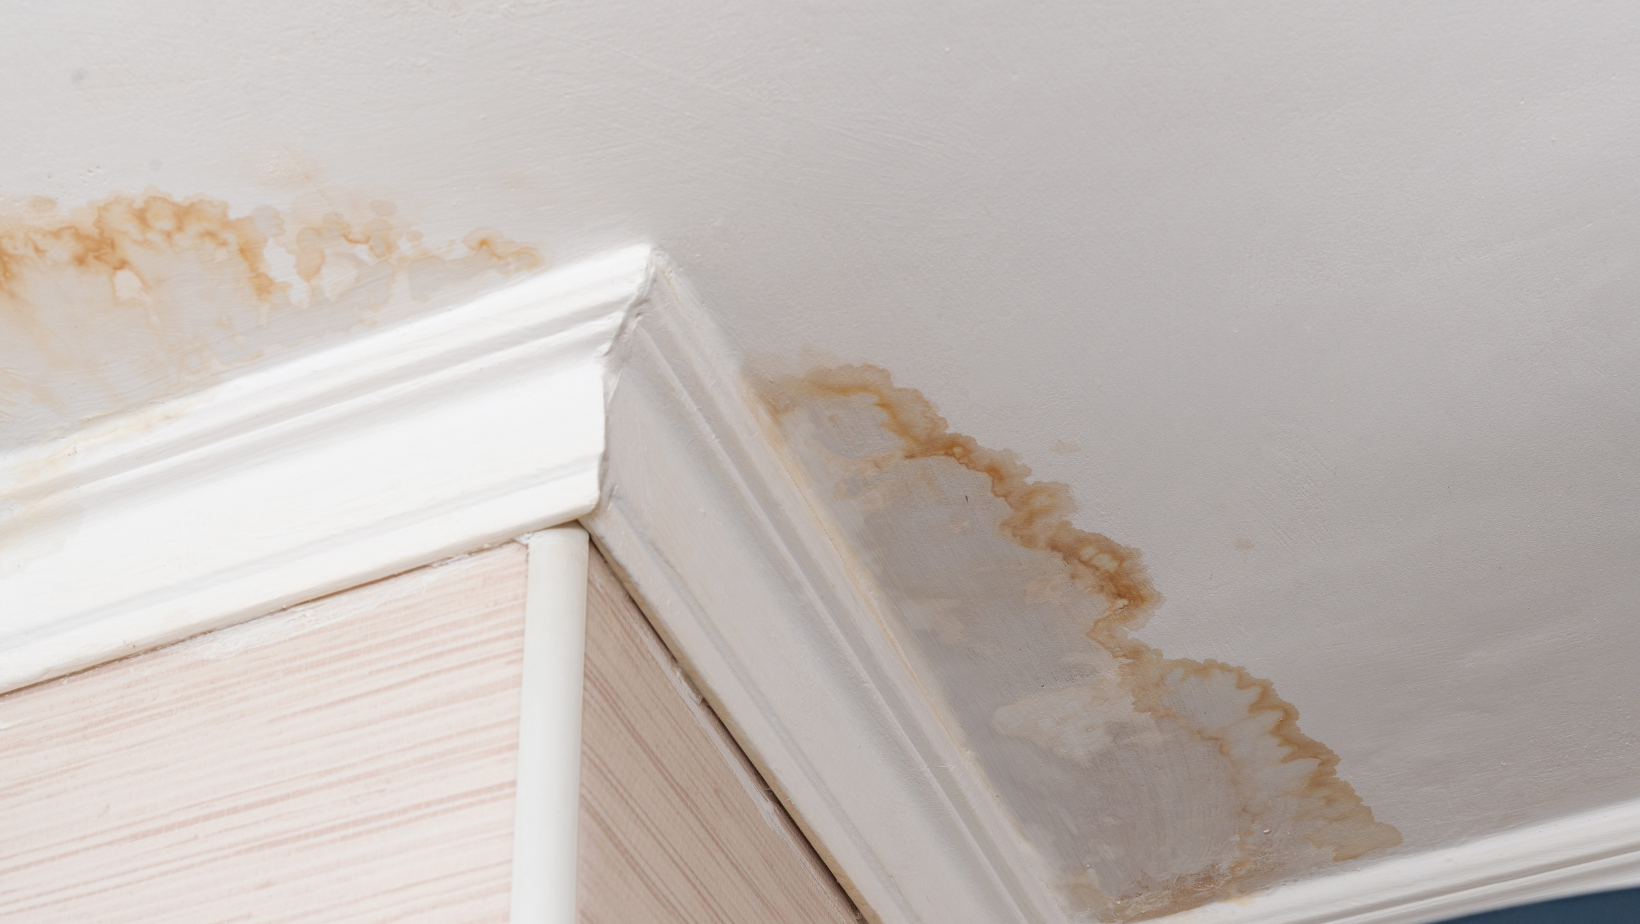 Steps to Remove Smoke Odors After a Fire